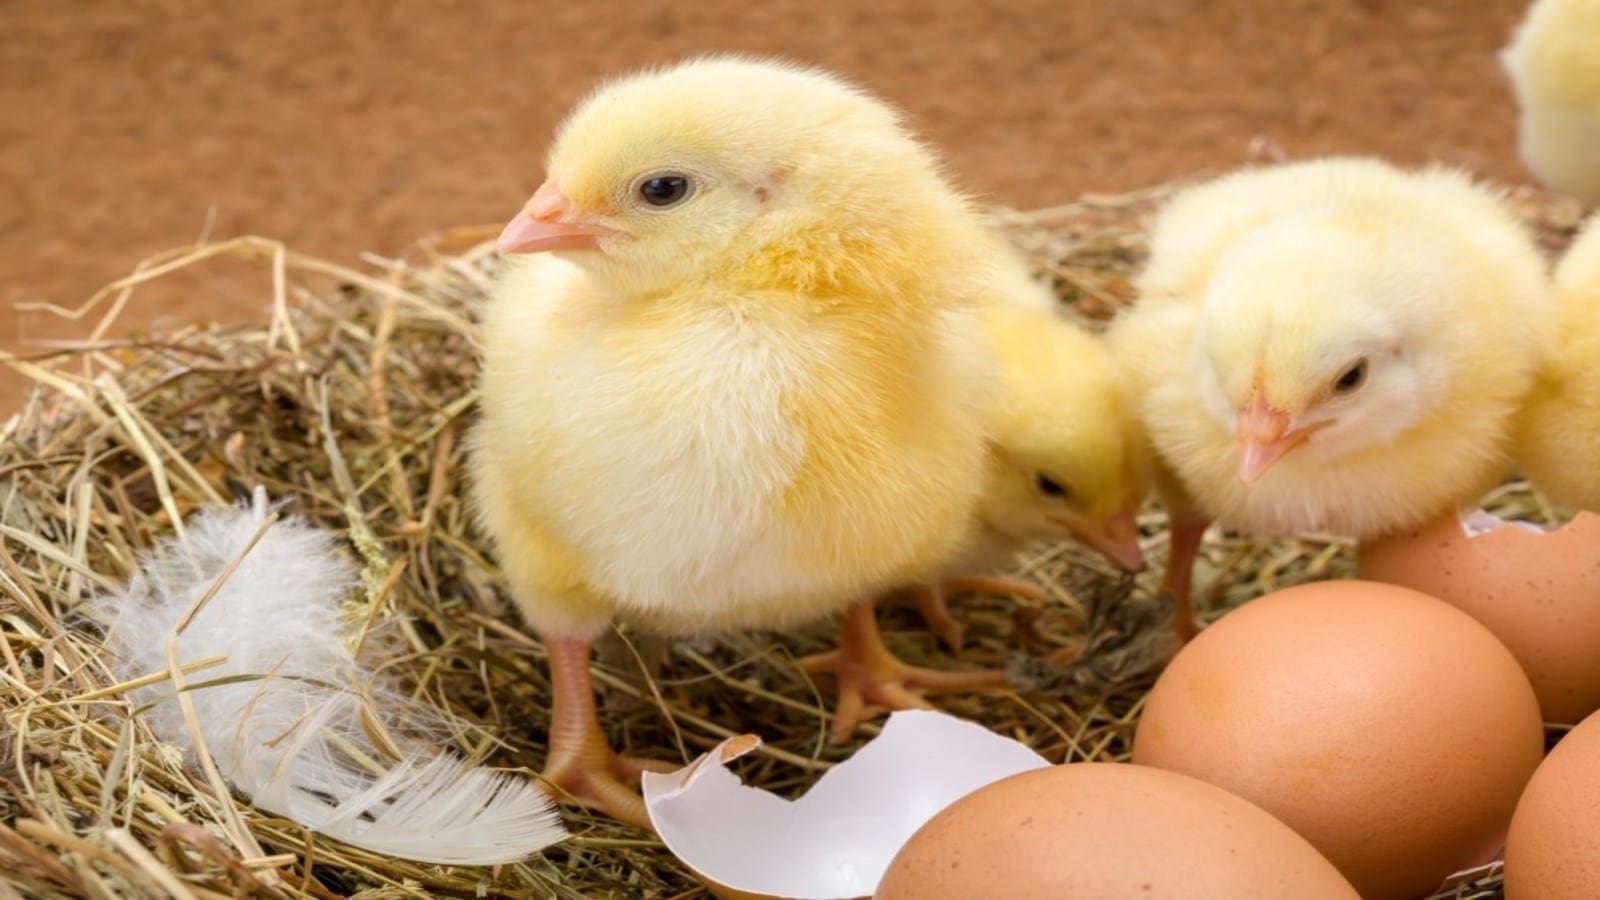 Zimbabwean government suspends import duty on fertilized eggs to boost production